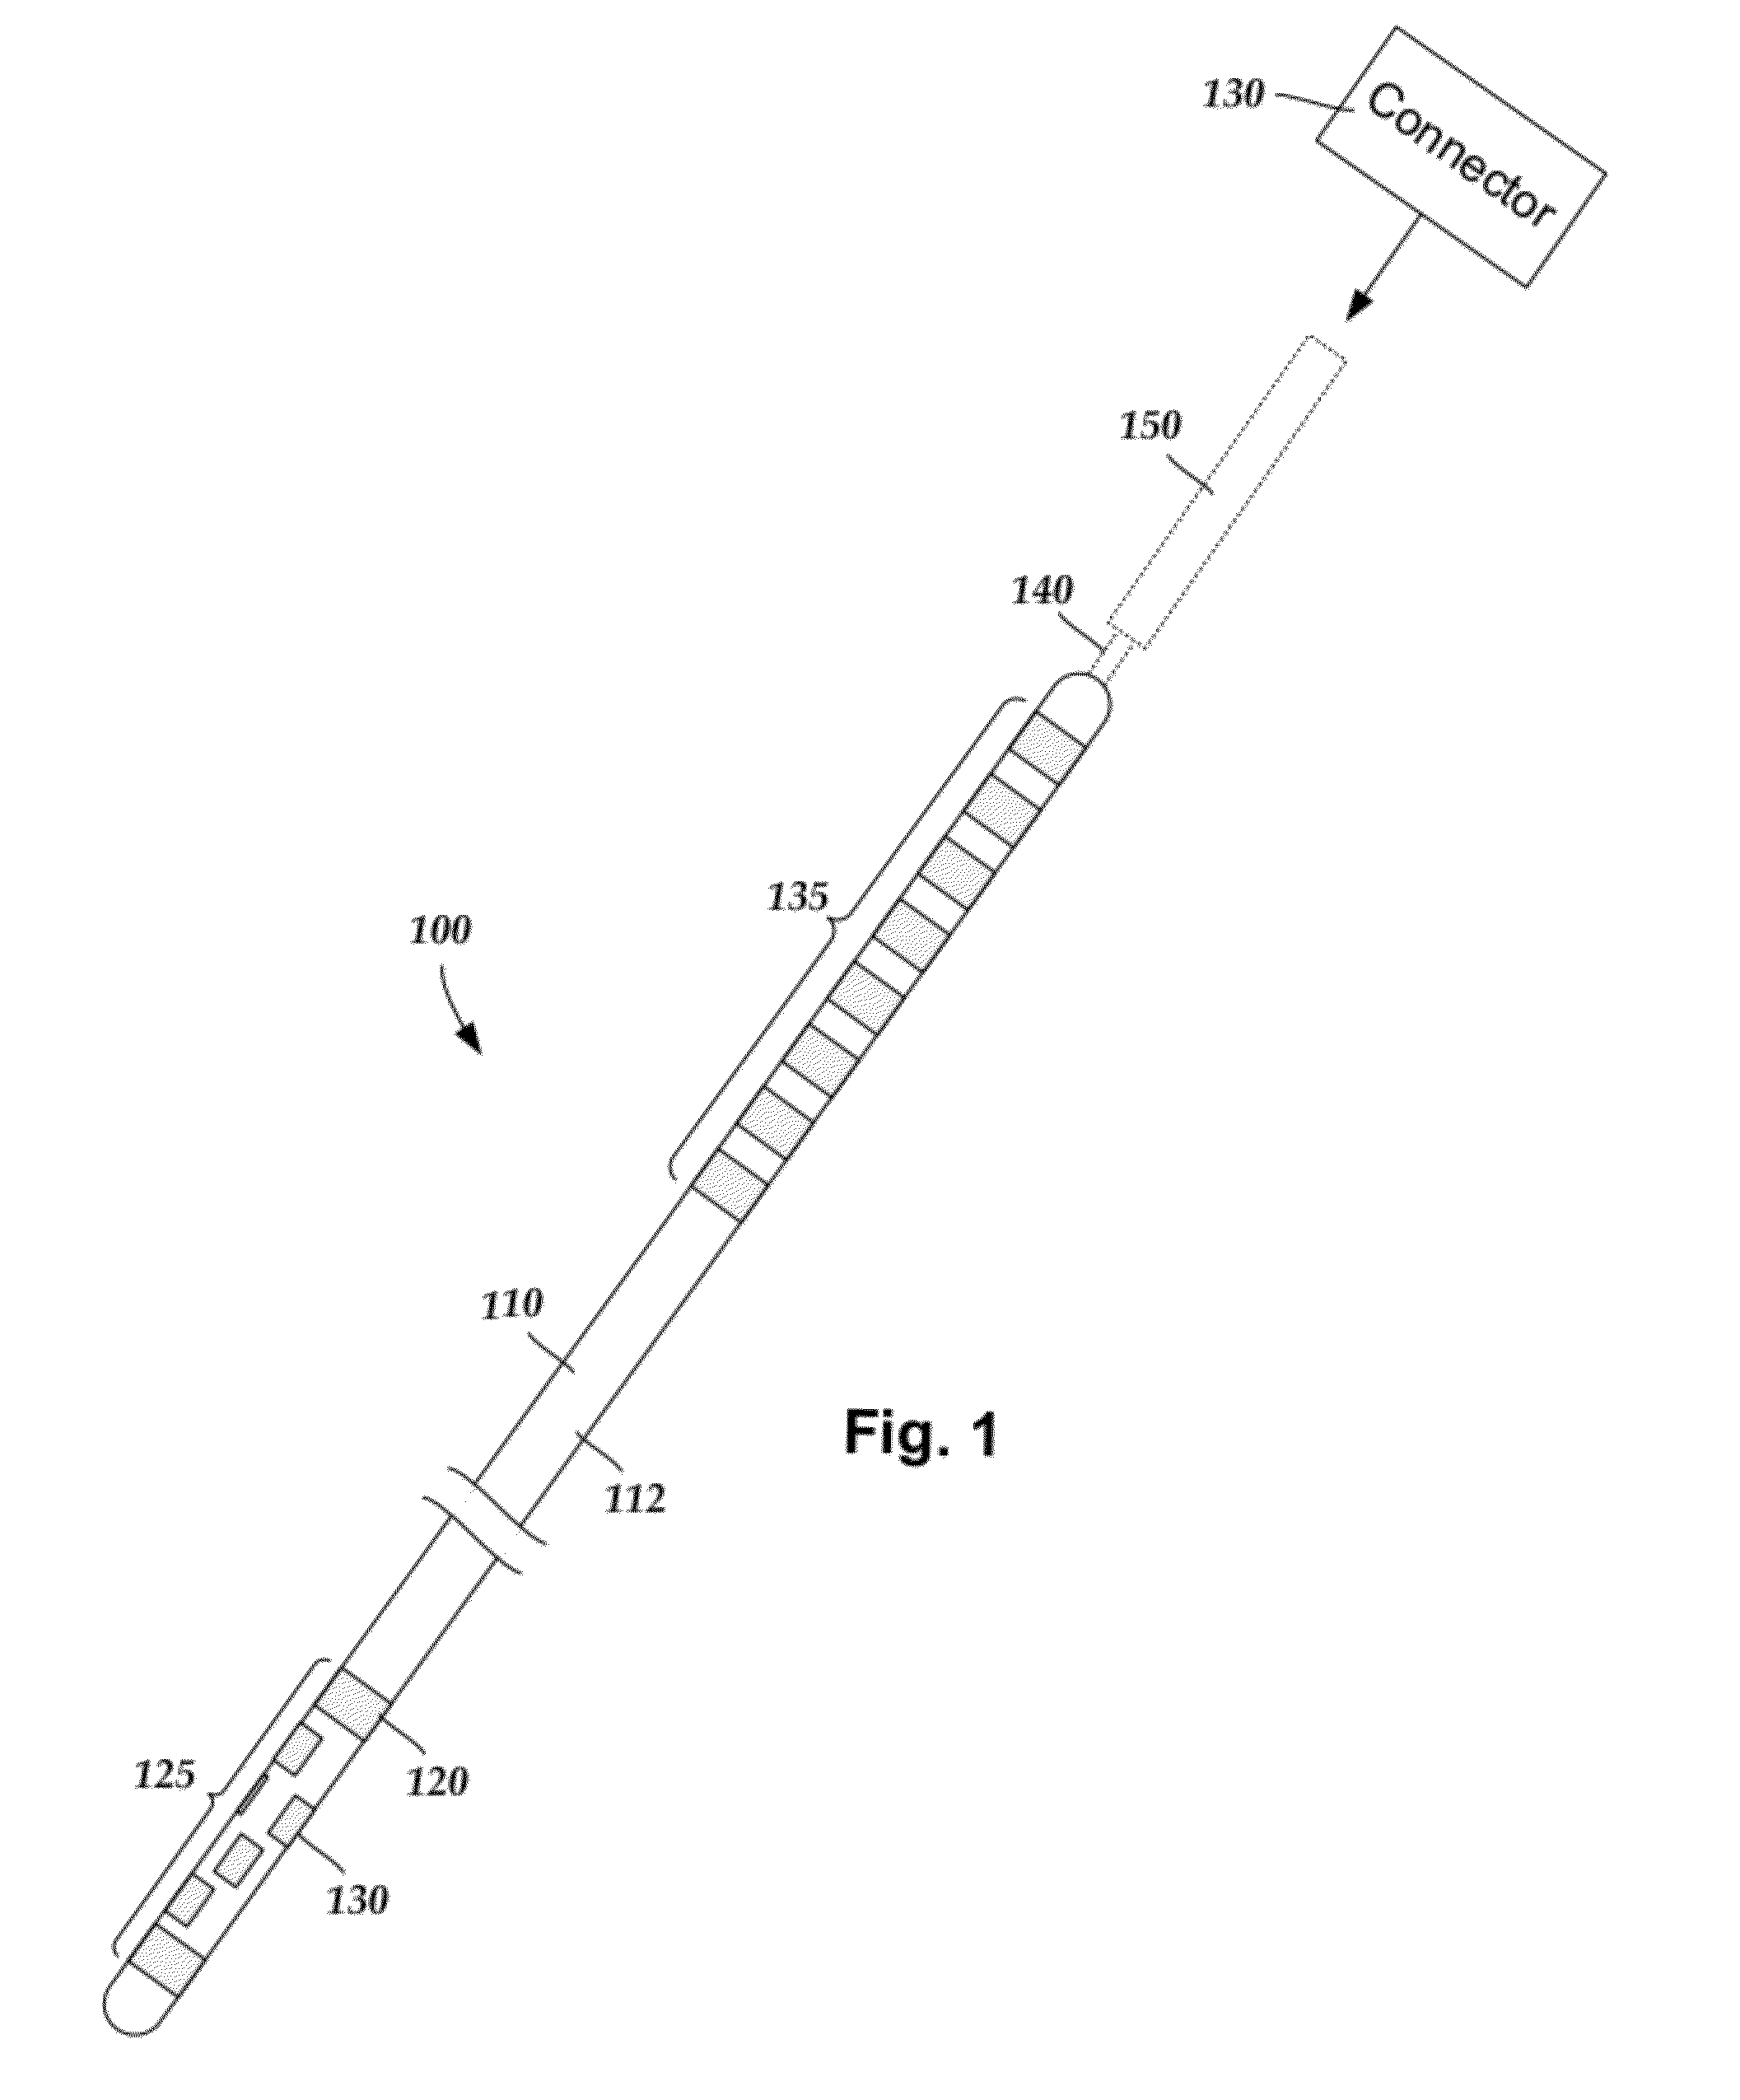 Leads with spiral of helical segmented electrode arrays and methods of making and using the leads